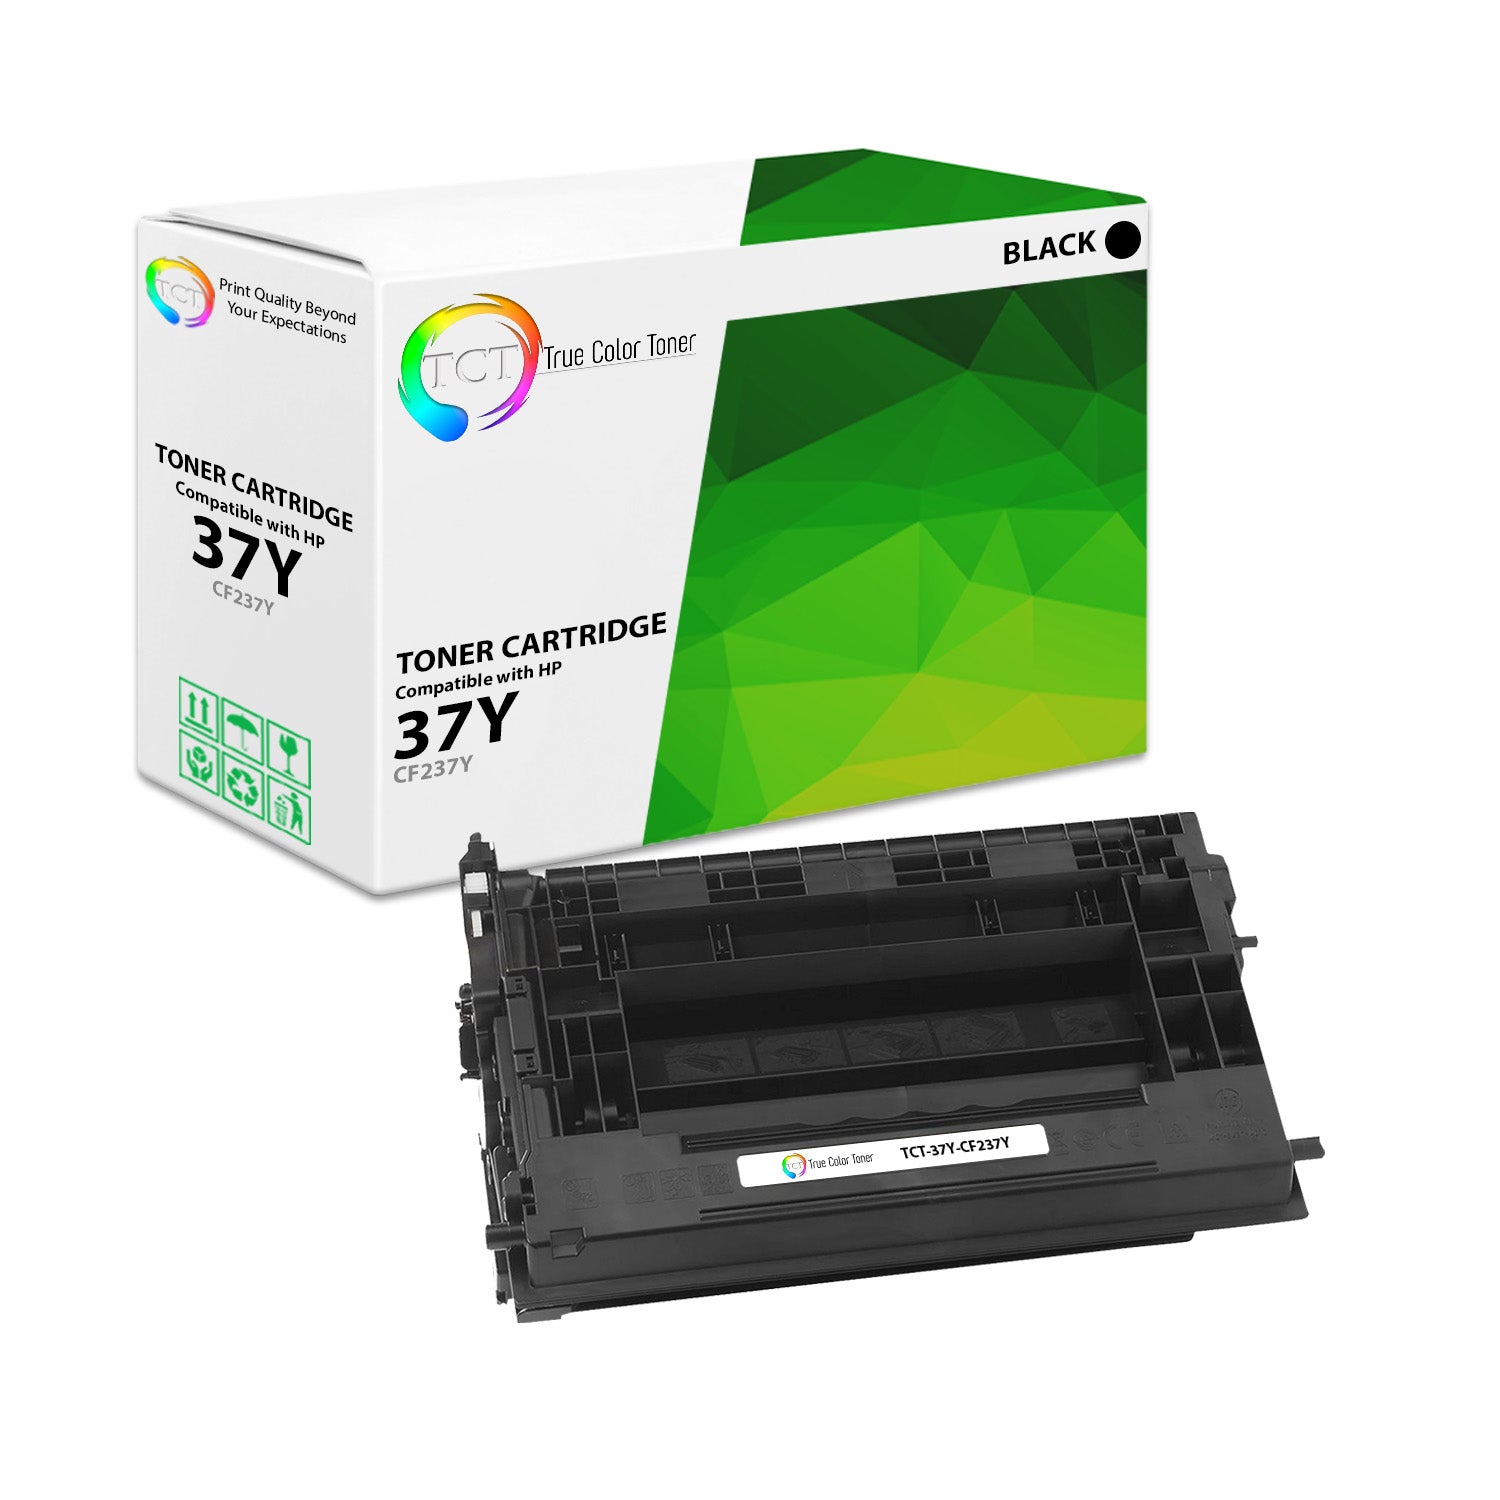 TCT Compatible High Yield Toner Cartridge Replacement for the HP 37Y Series - 1 Pack Black